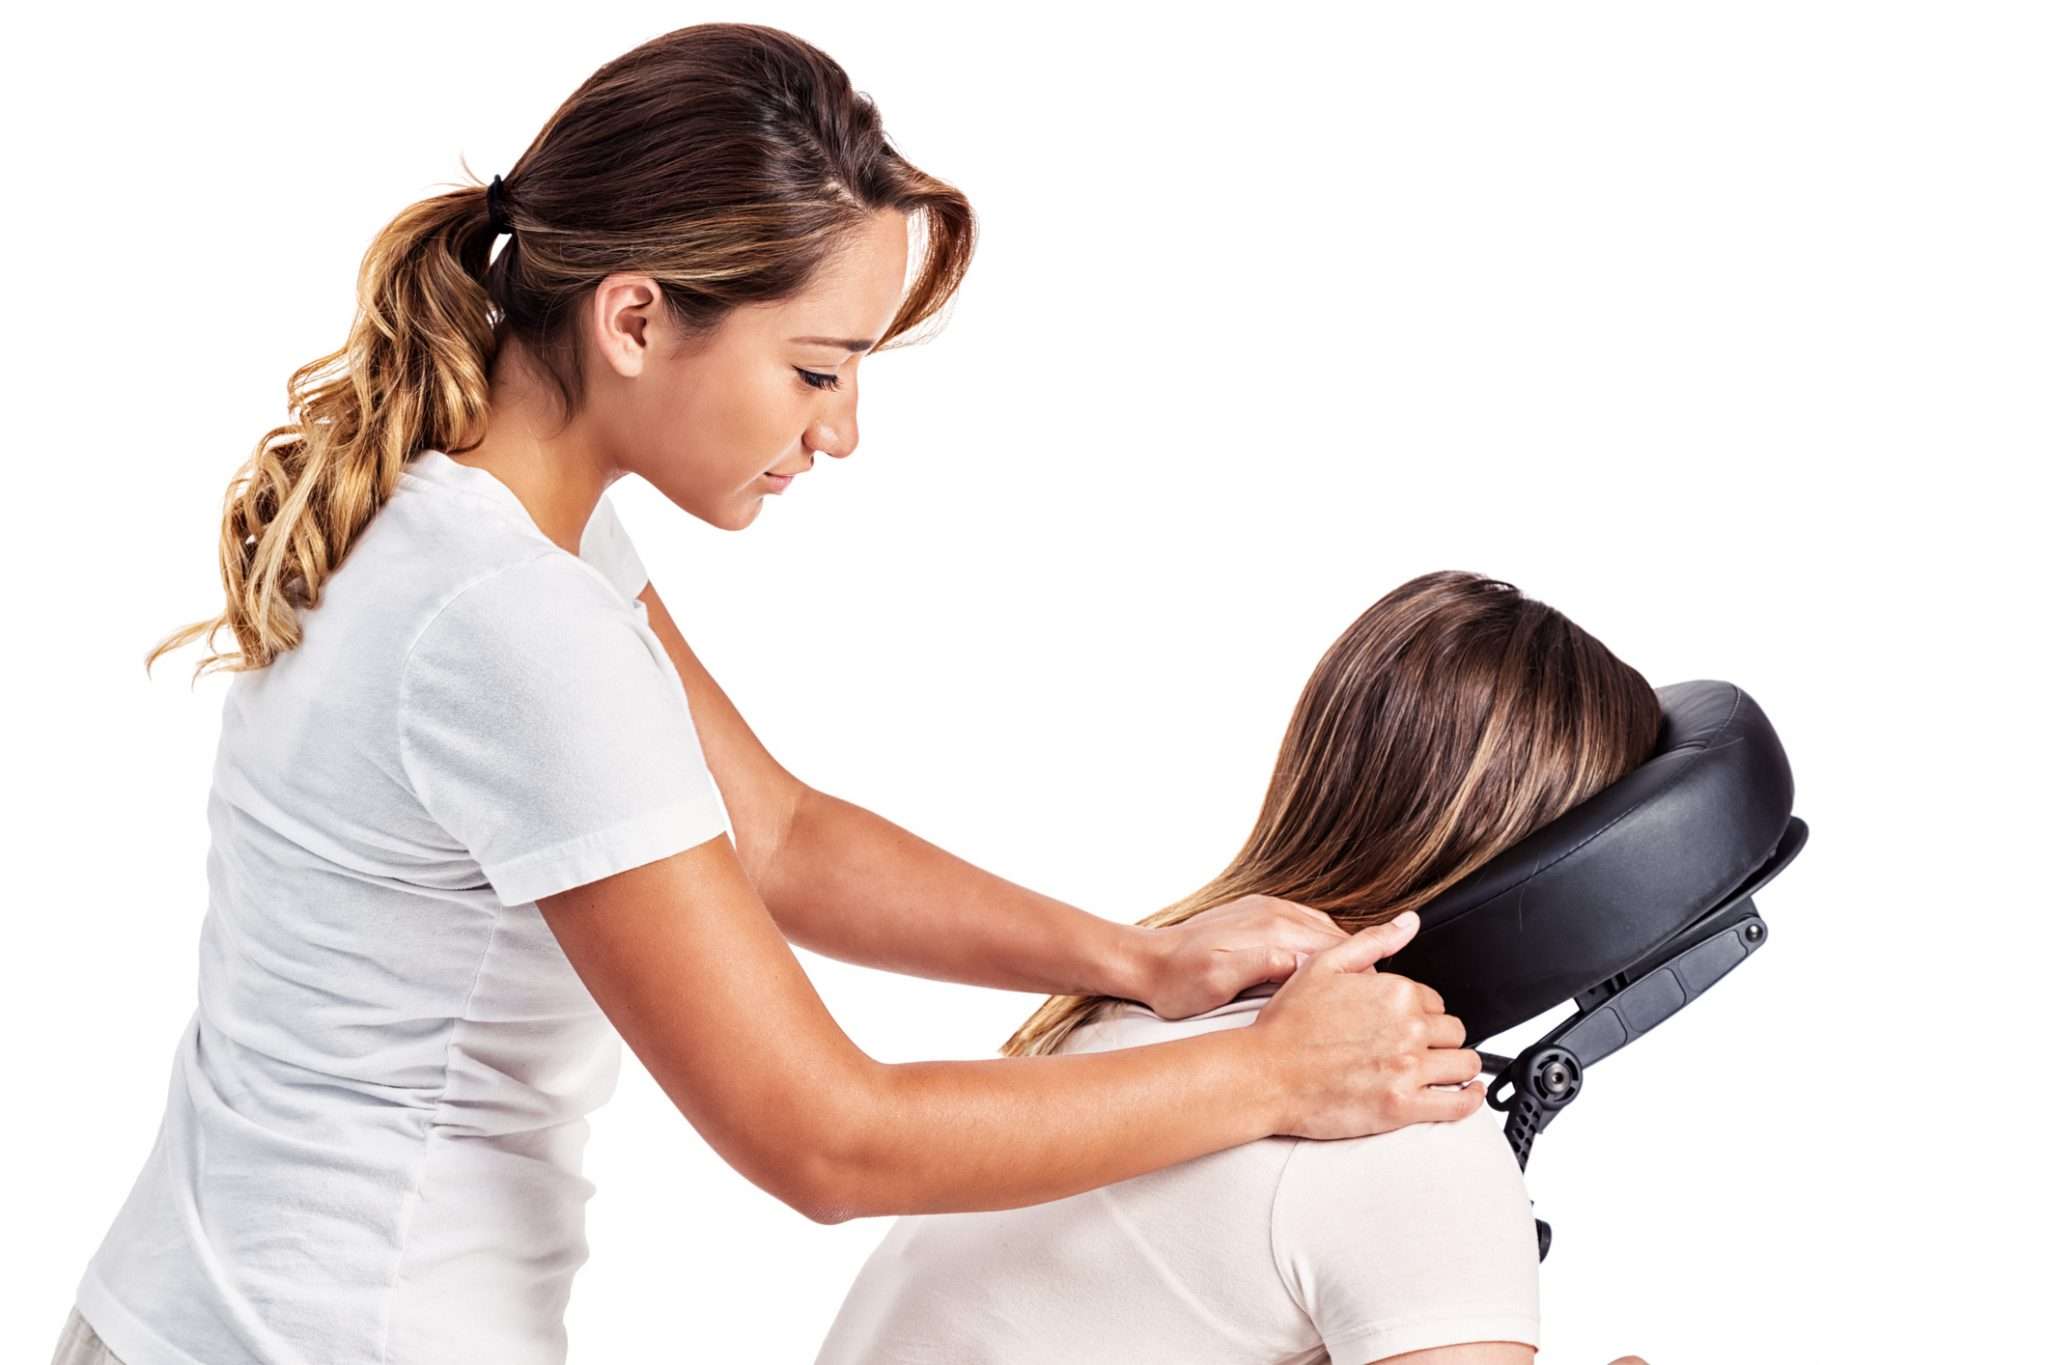 What are the Qualities of a Good Massage Therapist?